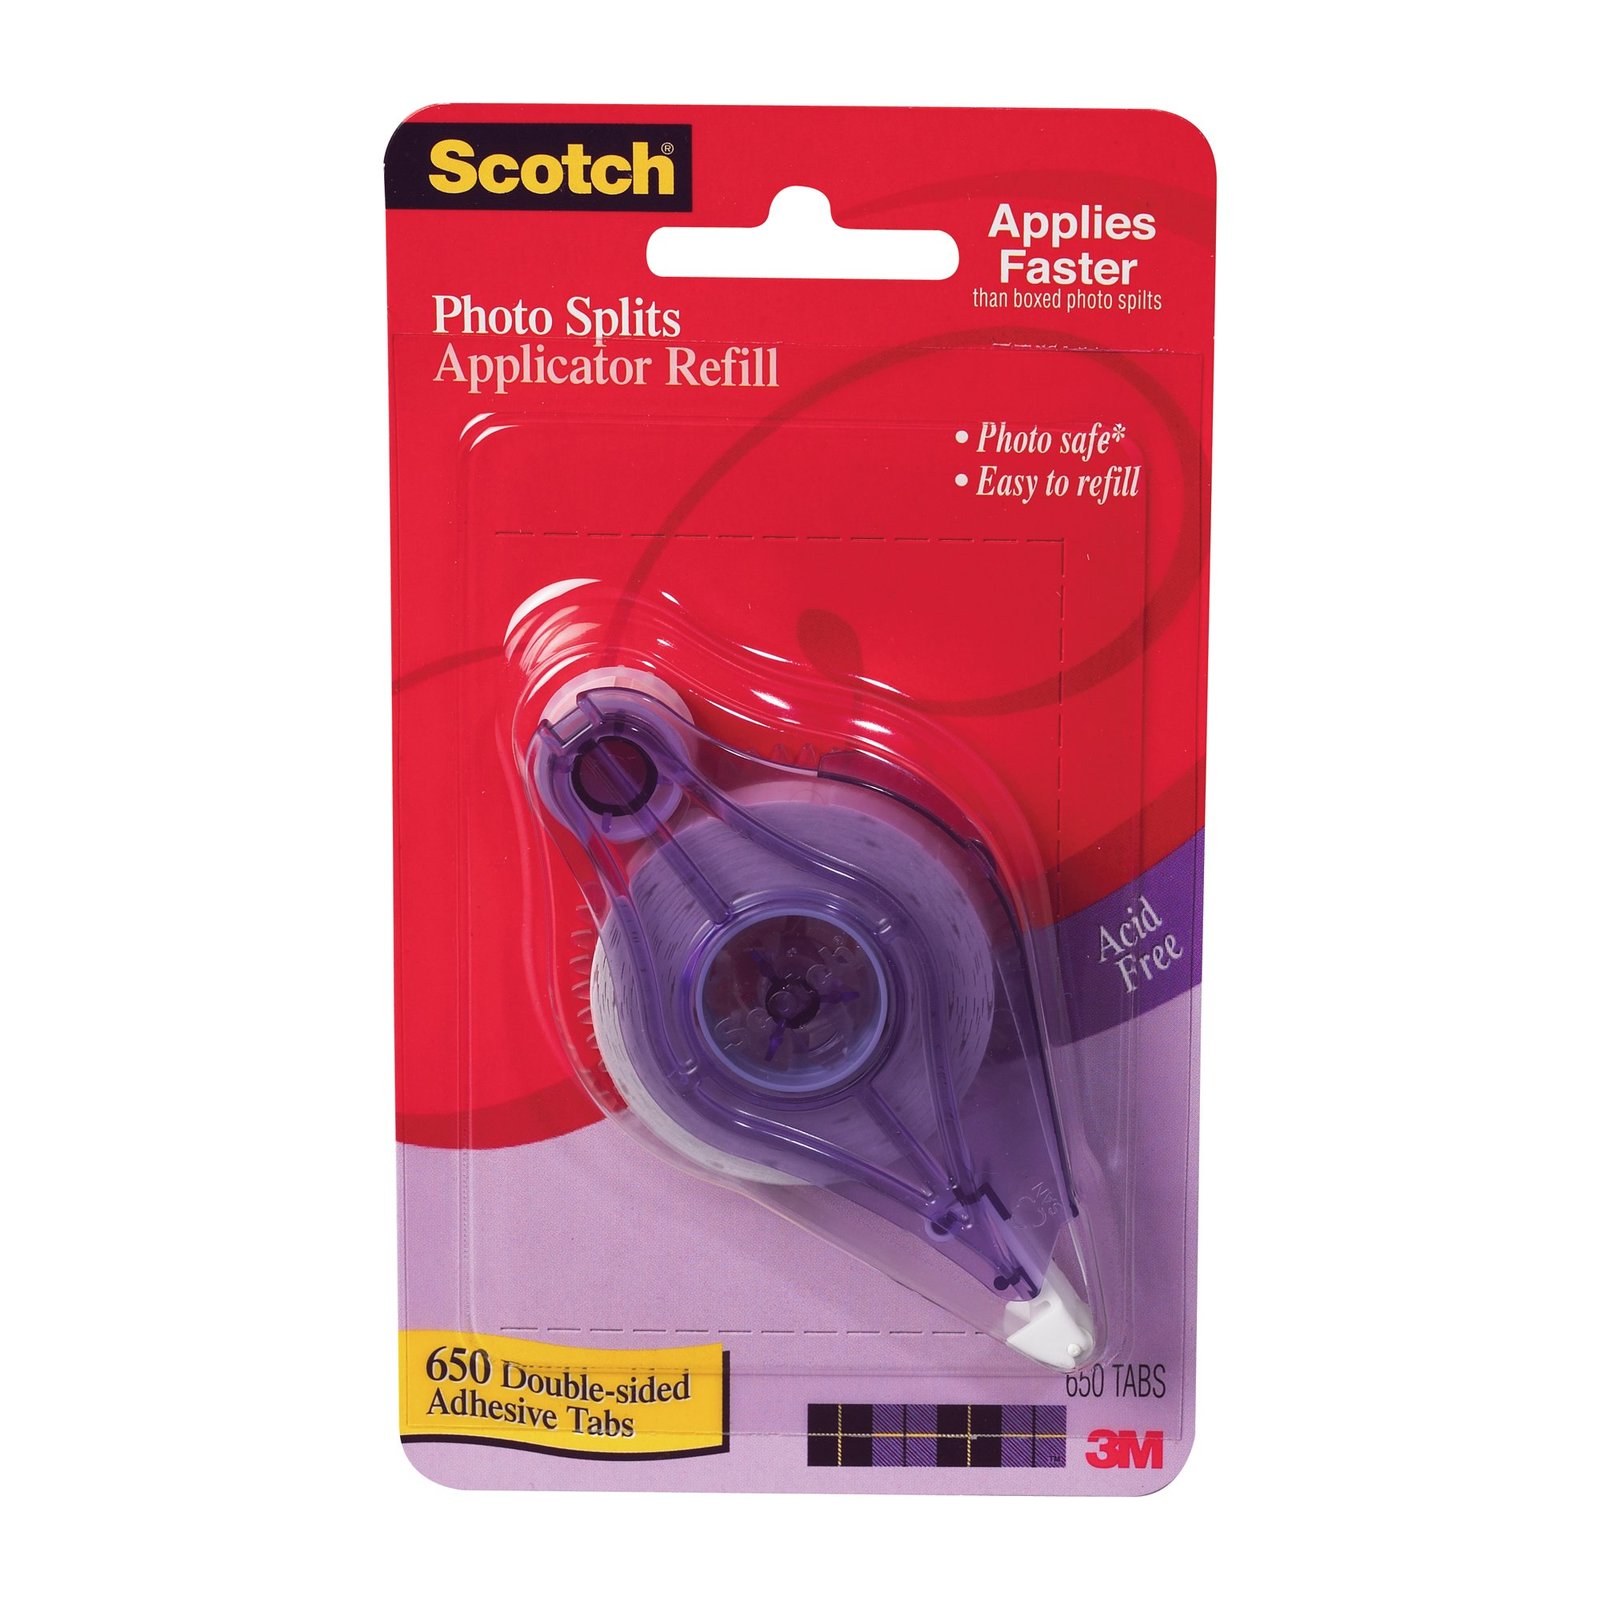 Scotch Adhesive Squares Applicator Refill, .31 in x .43 in, Acid-free and photo  - $15.10